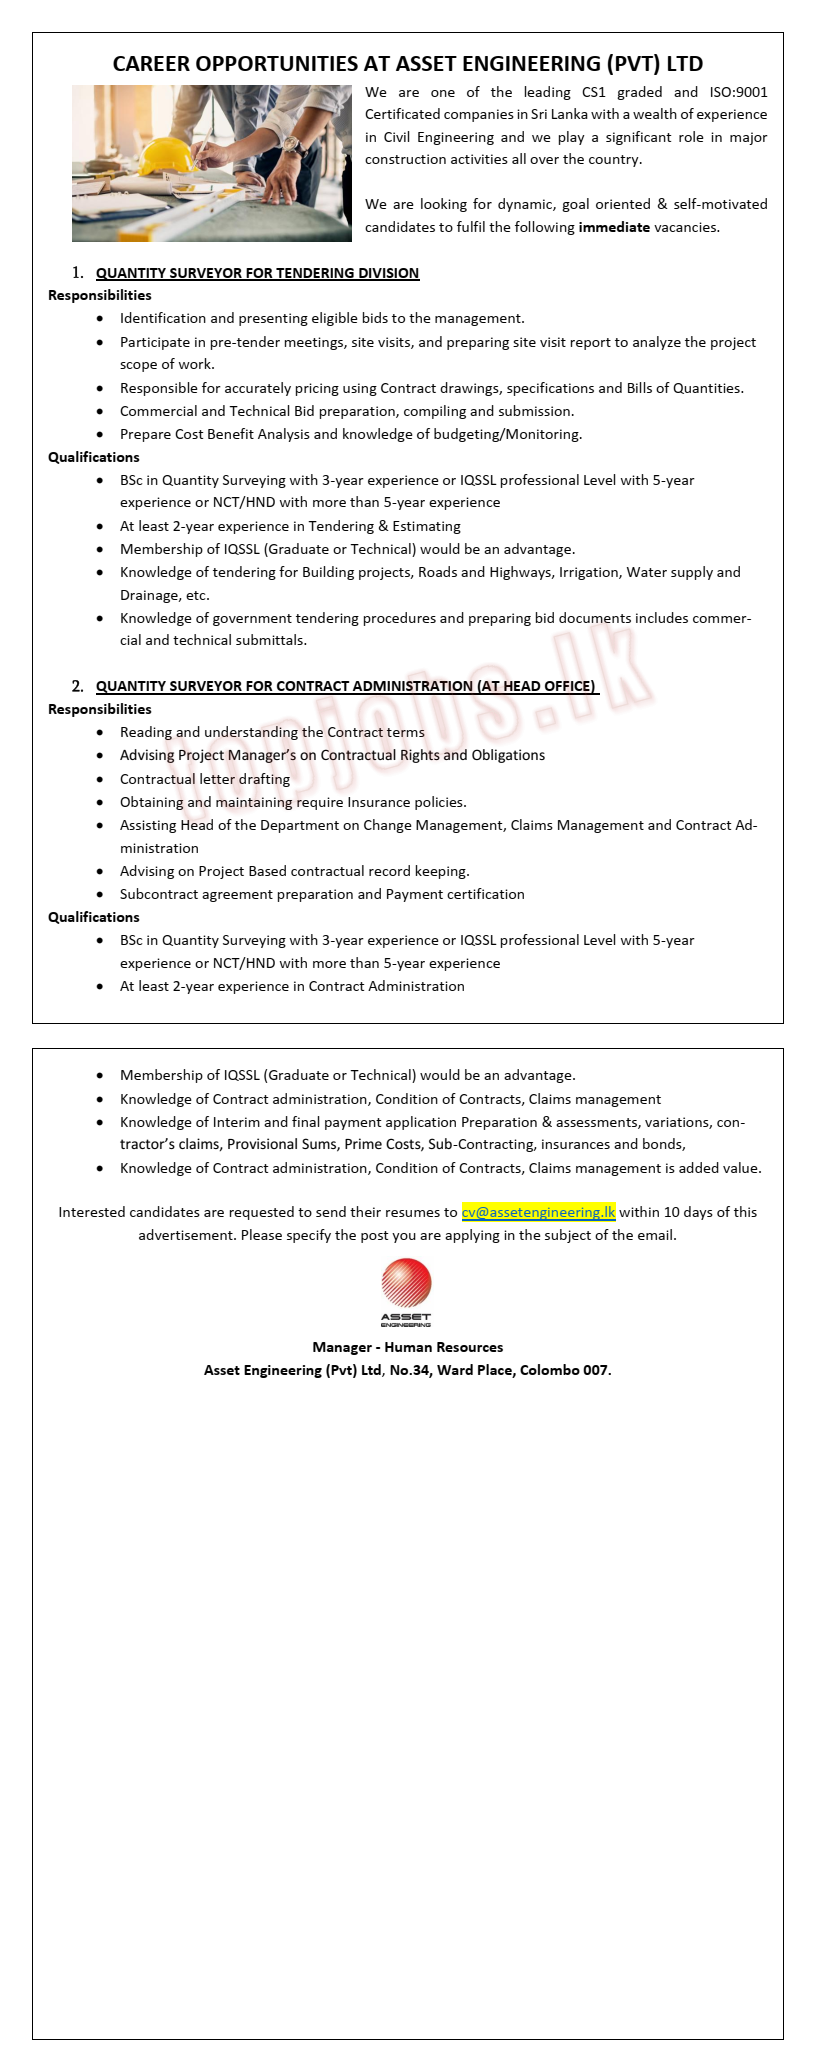 Quantity Surveyor for Tendering Division / Quantity Surveyor for Contract Administration (Head Office)